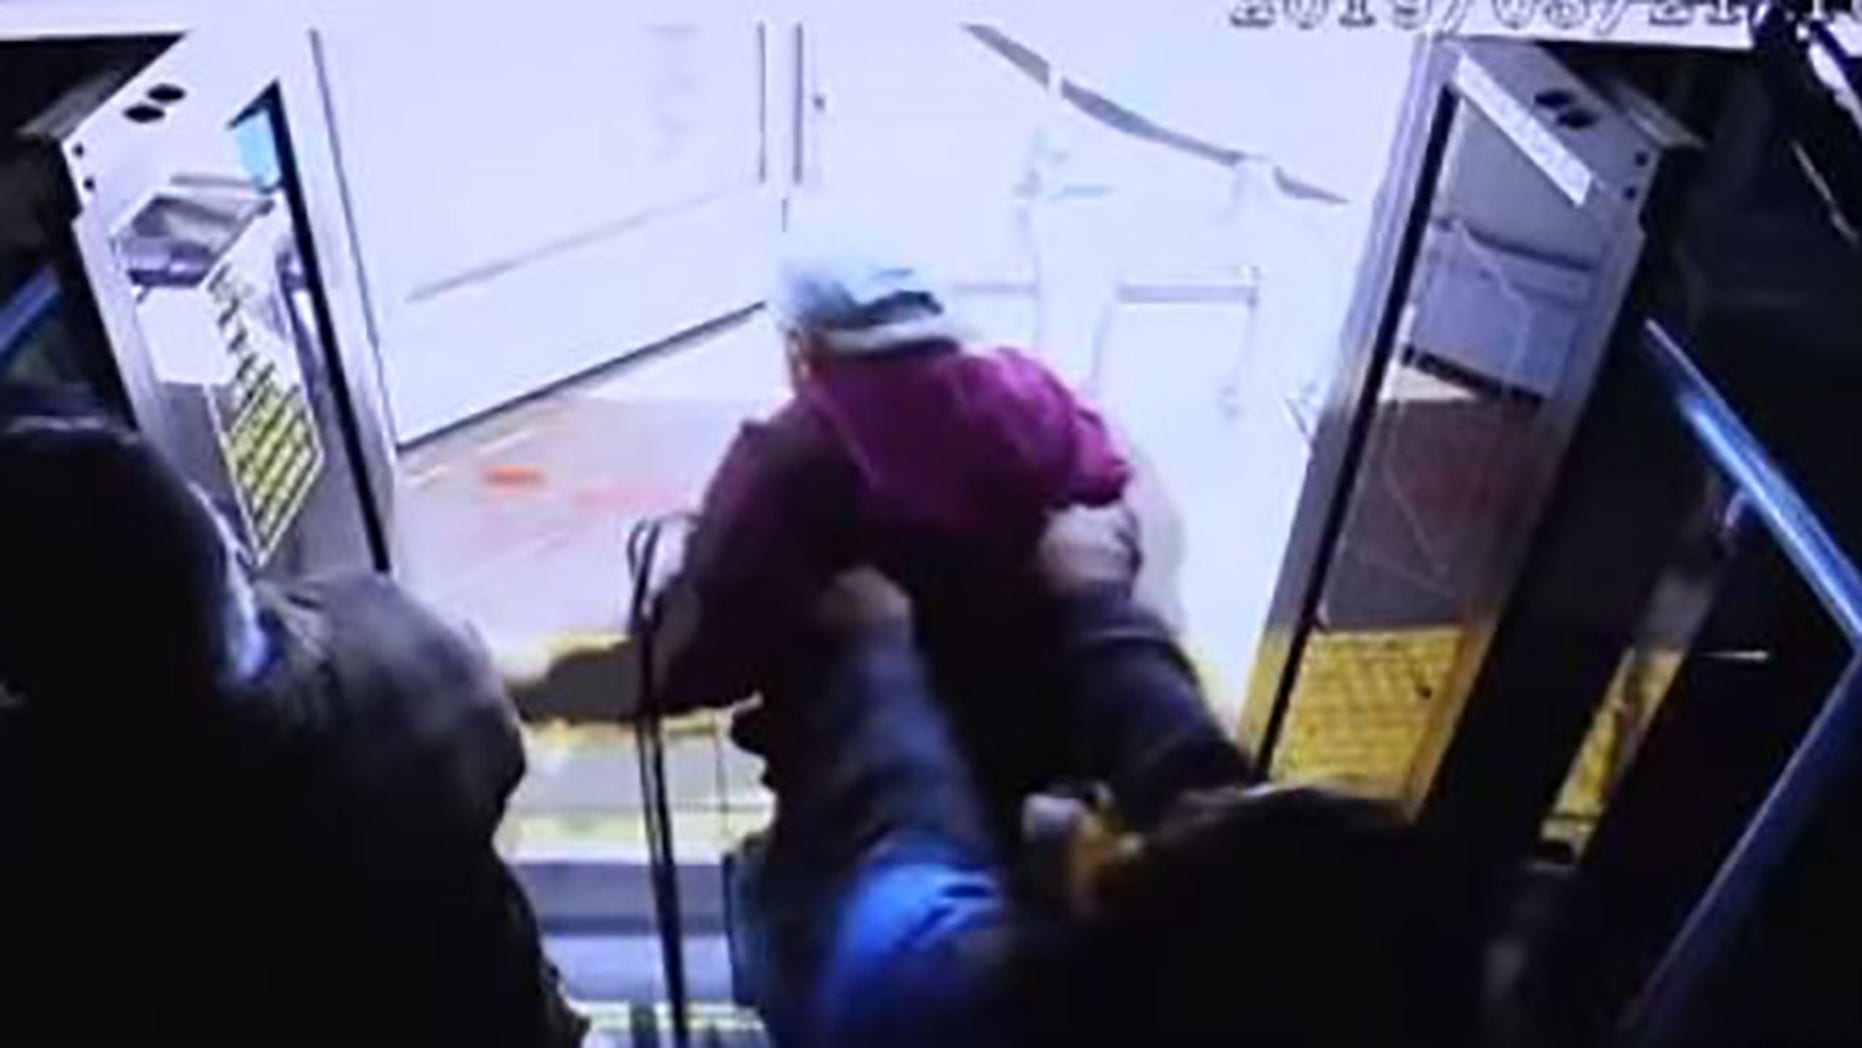 The surveillance video shows Bishop allegedly push Fournier out of the door of the stopped bus. 